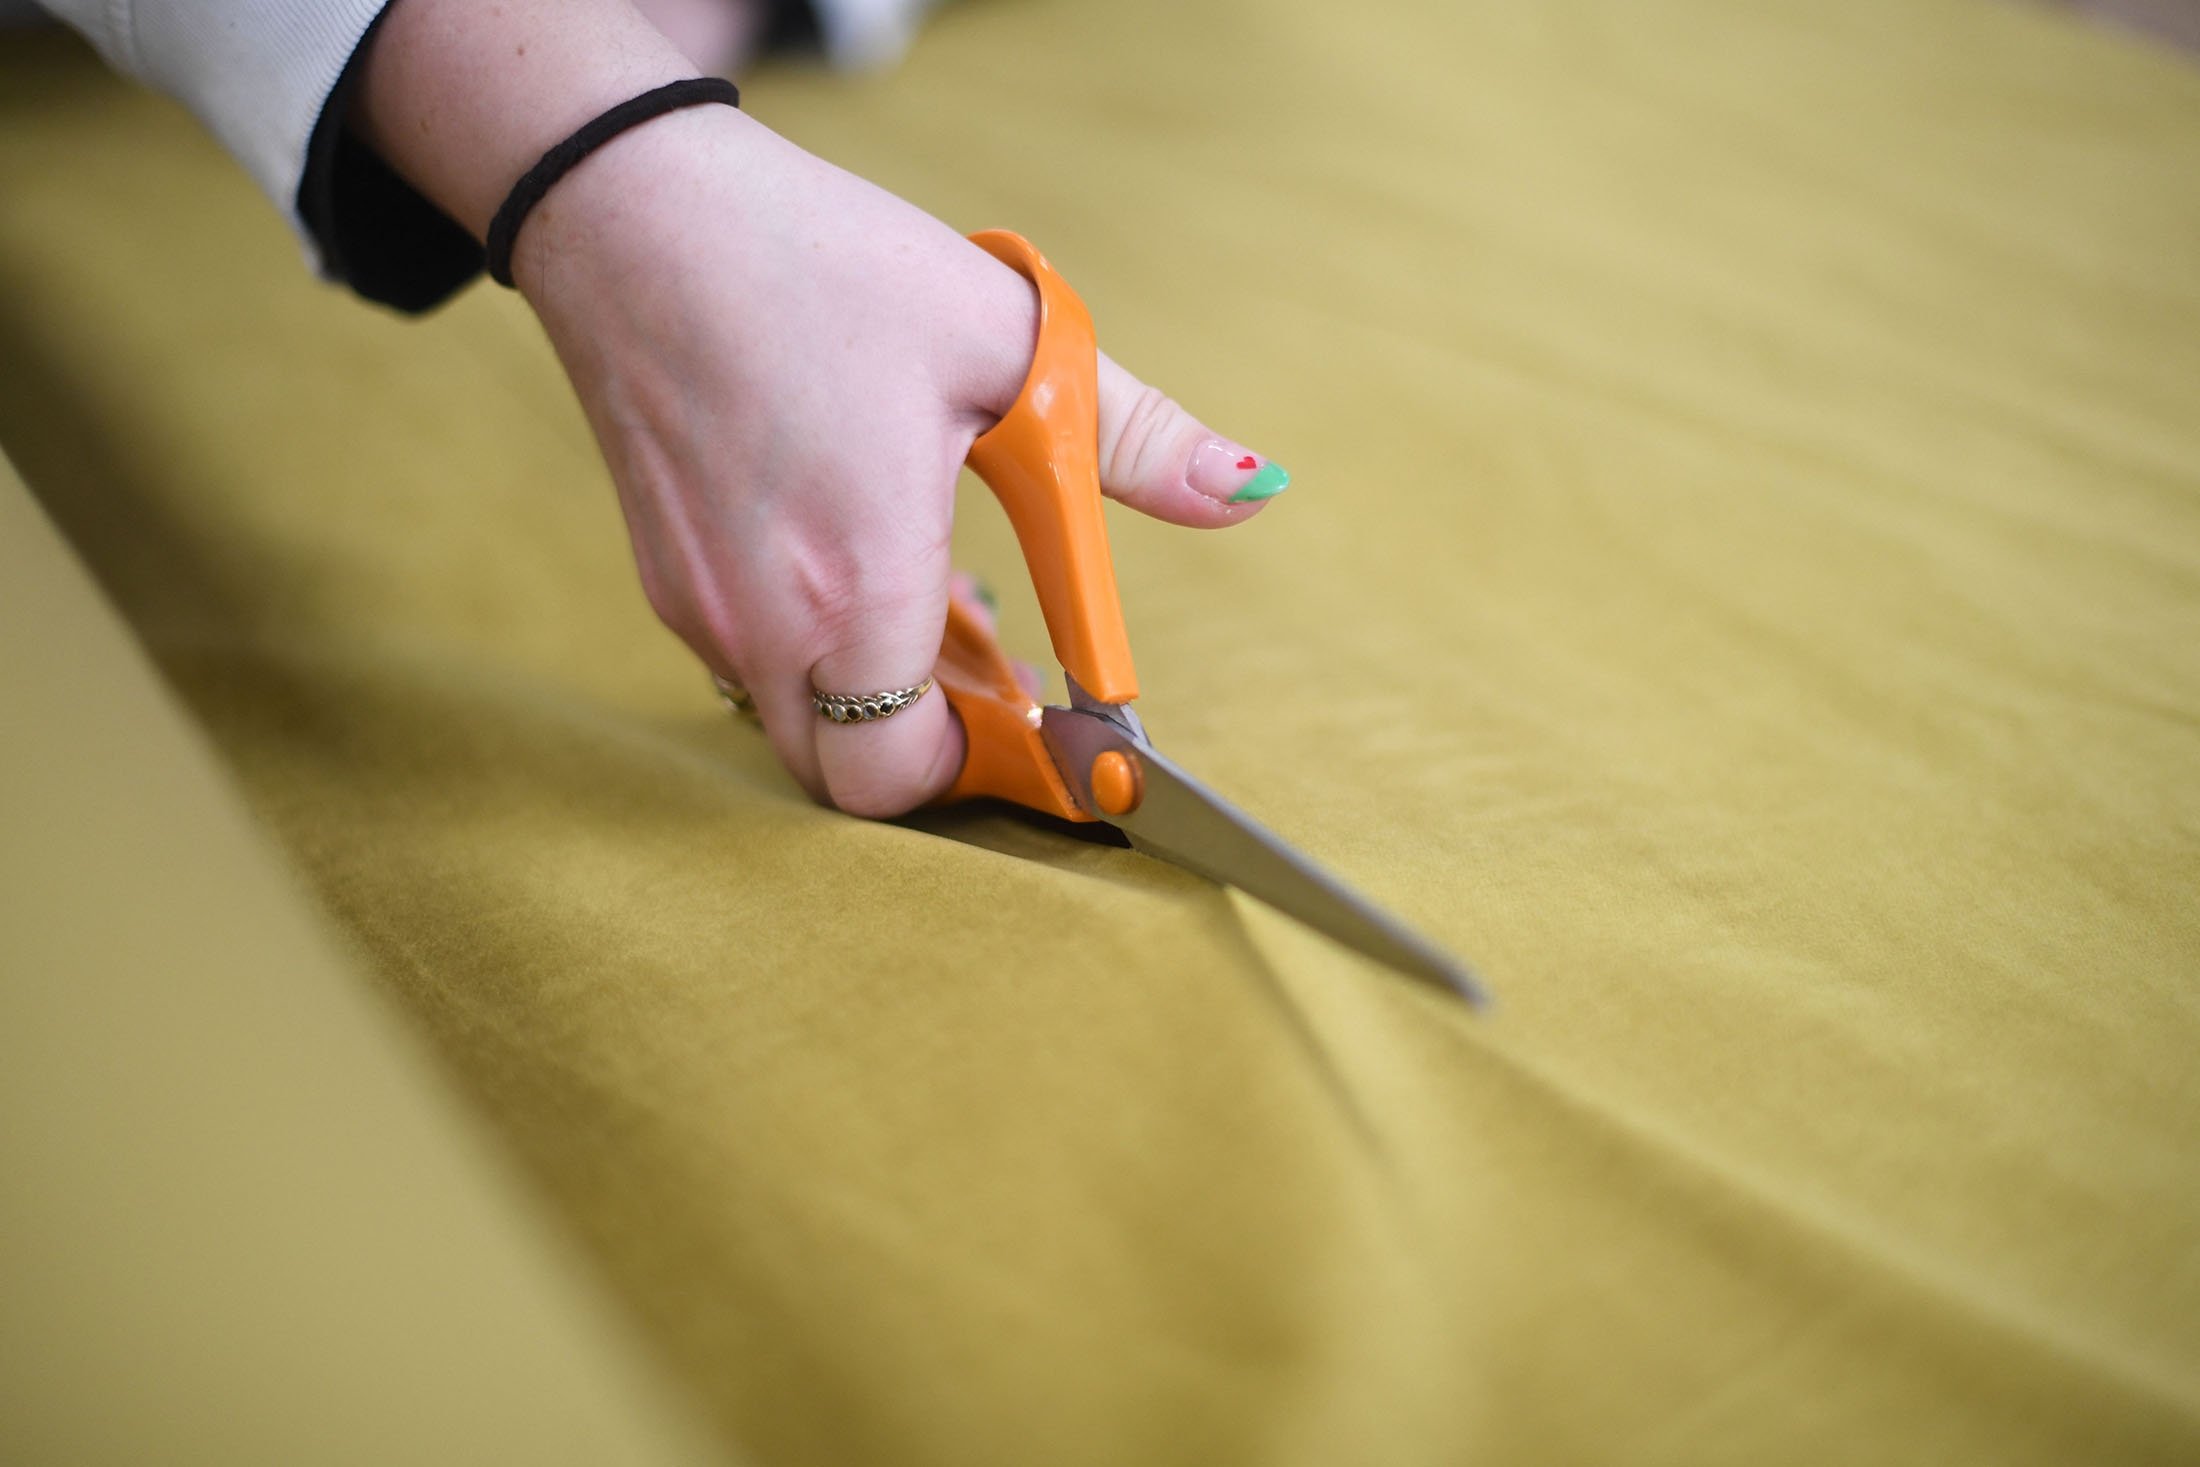 Molly cuts a piece of fabric for an online order at The New Craft House, a sewing workshop studio and designer deadstock fabric shop, in Hackney, East London, U.K., Feb. 11, 2022. (AFP Photo)